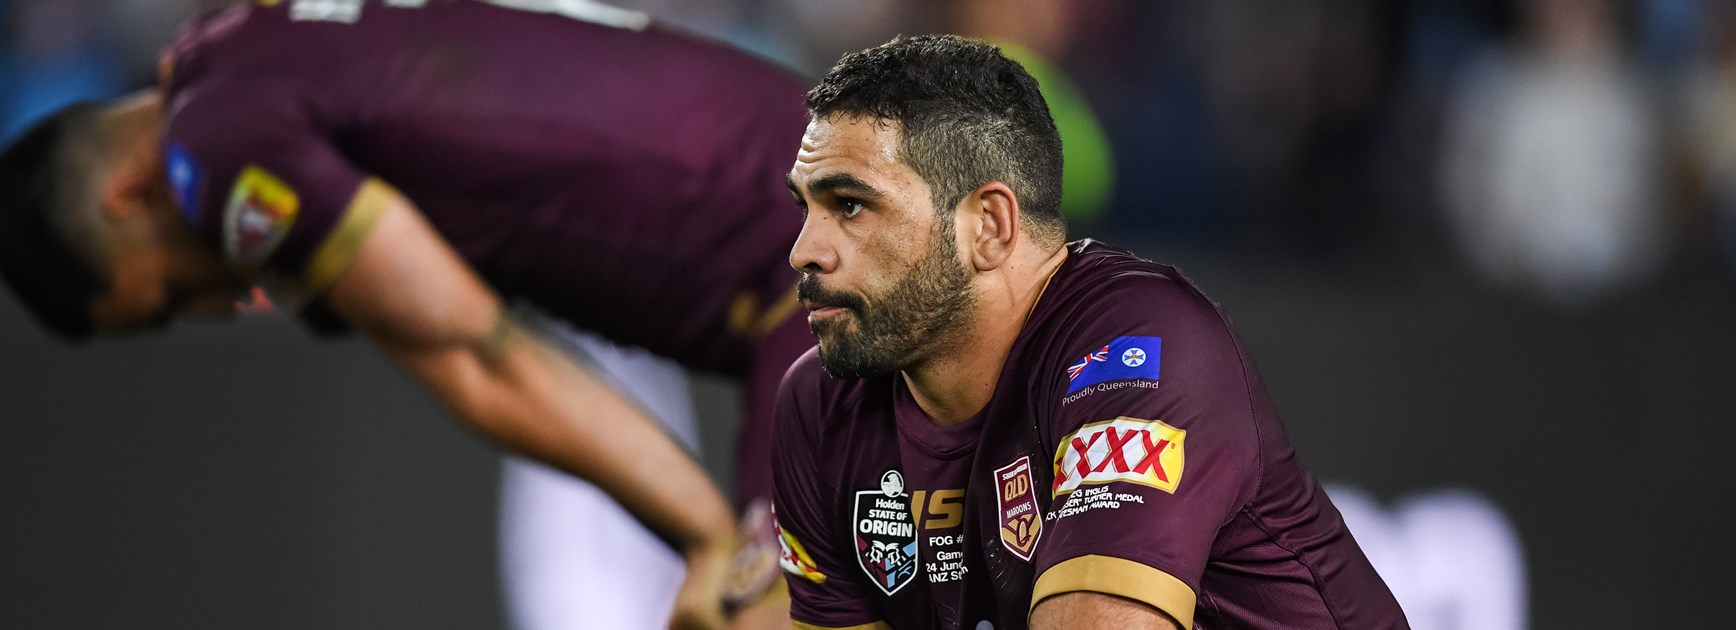 'He's doing it very tough': Hodges reaches out to Inglis